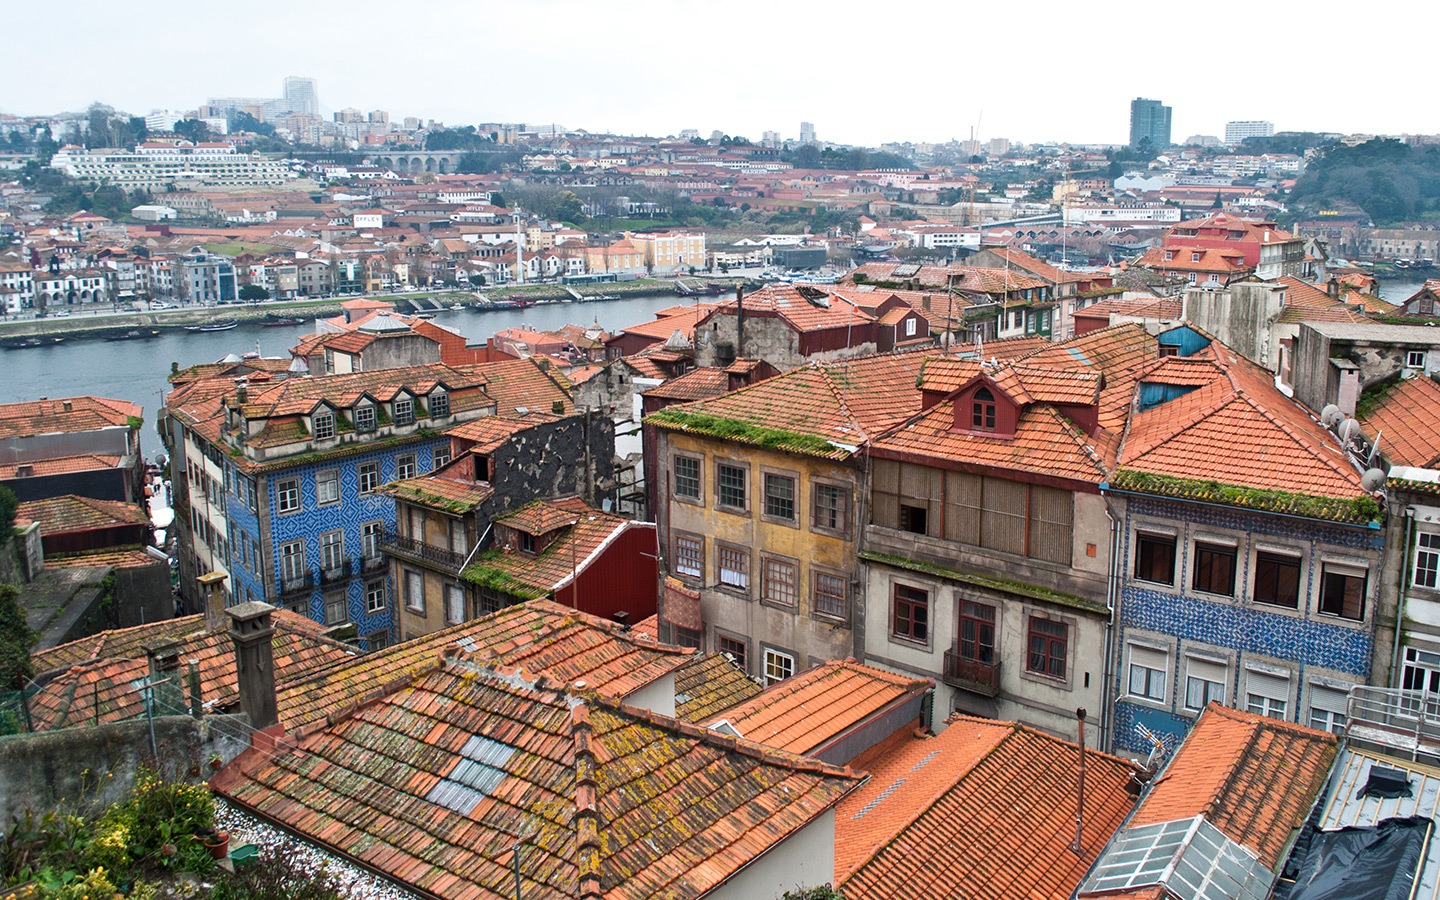 Rooftops in the historic Ribeira district of Porto